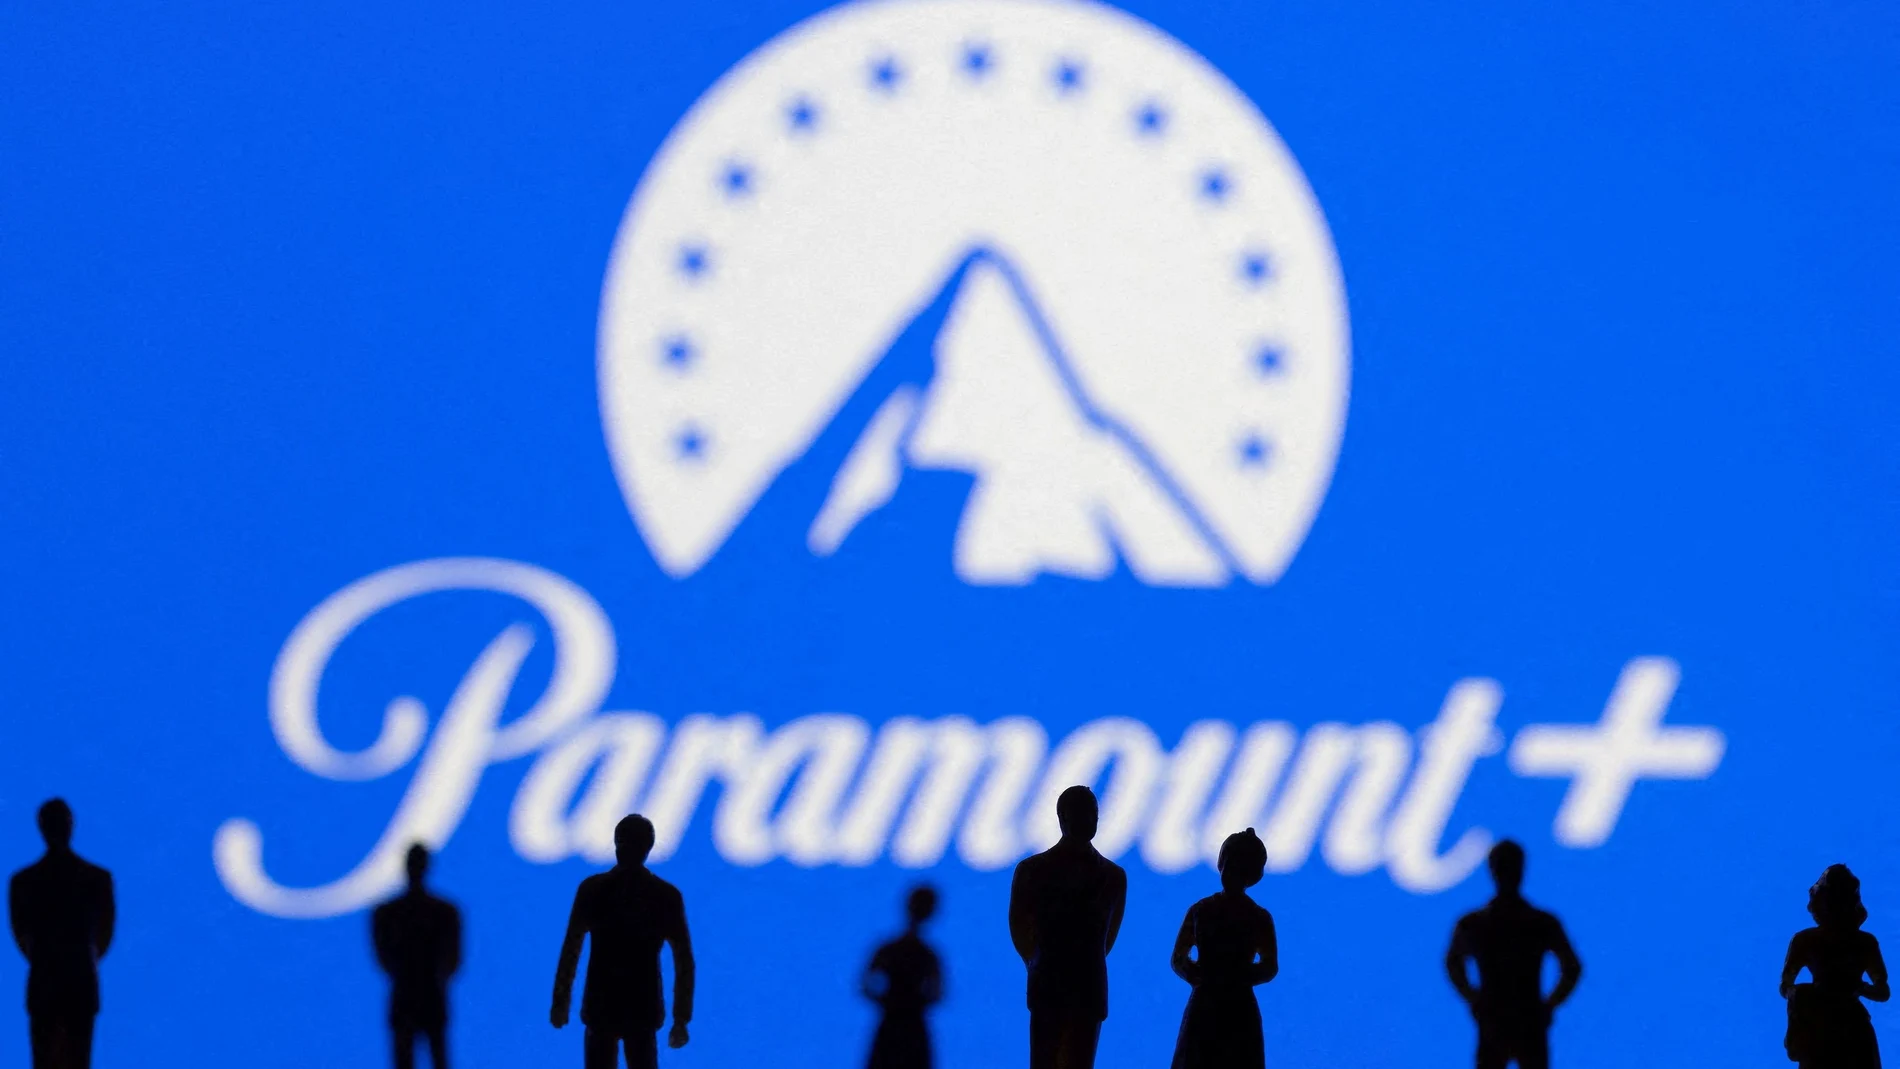 FILE PHOTO: Toy figures of people are seen in front of the displayed Paramount + logo, in this illustration taken January 20, 2022. REUTERS/Dado Ruvic/Illustration/File Photo